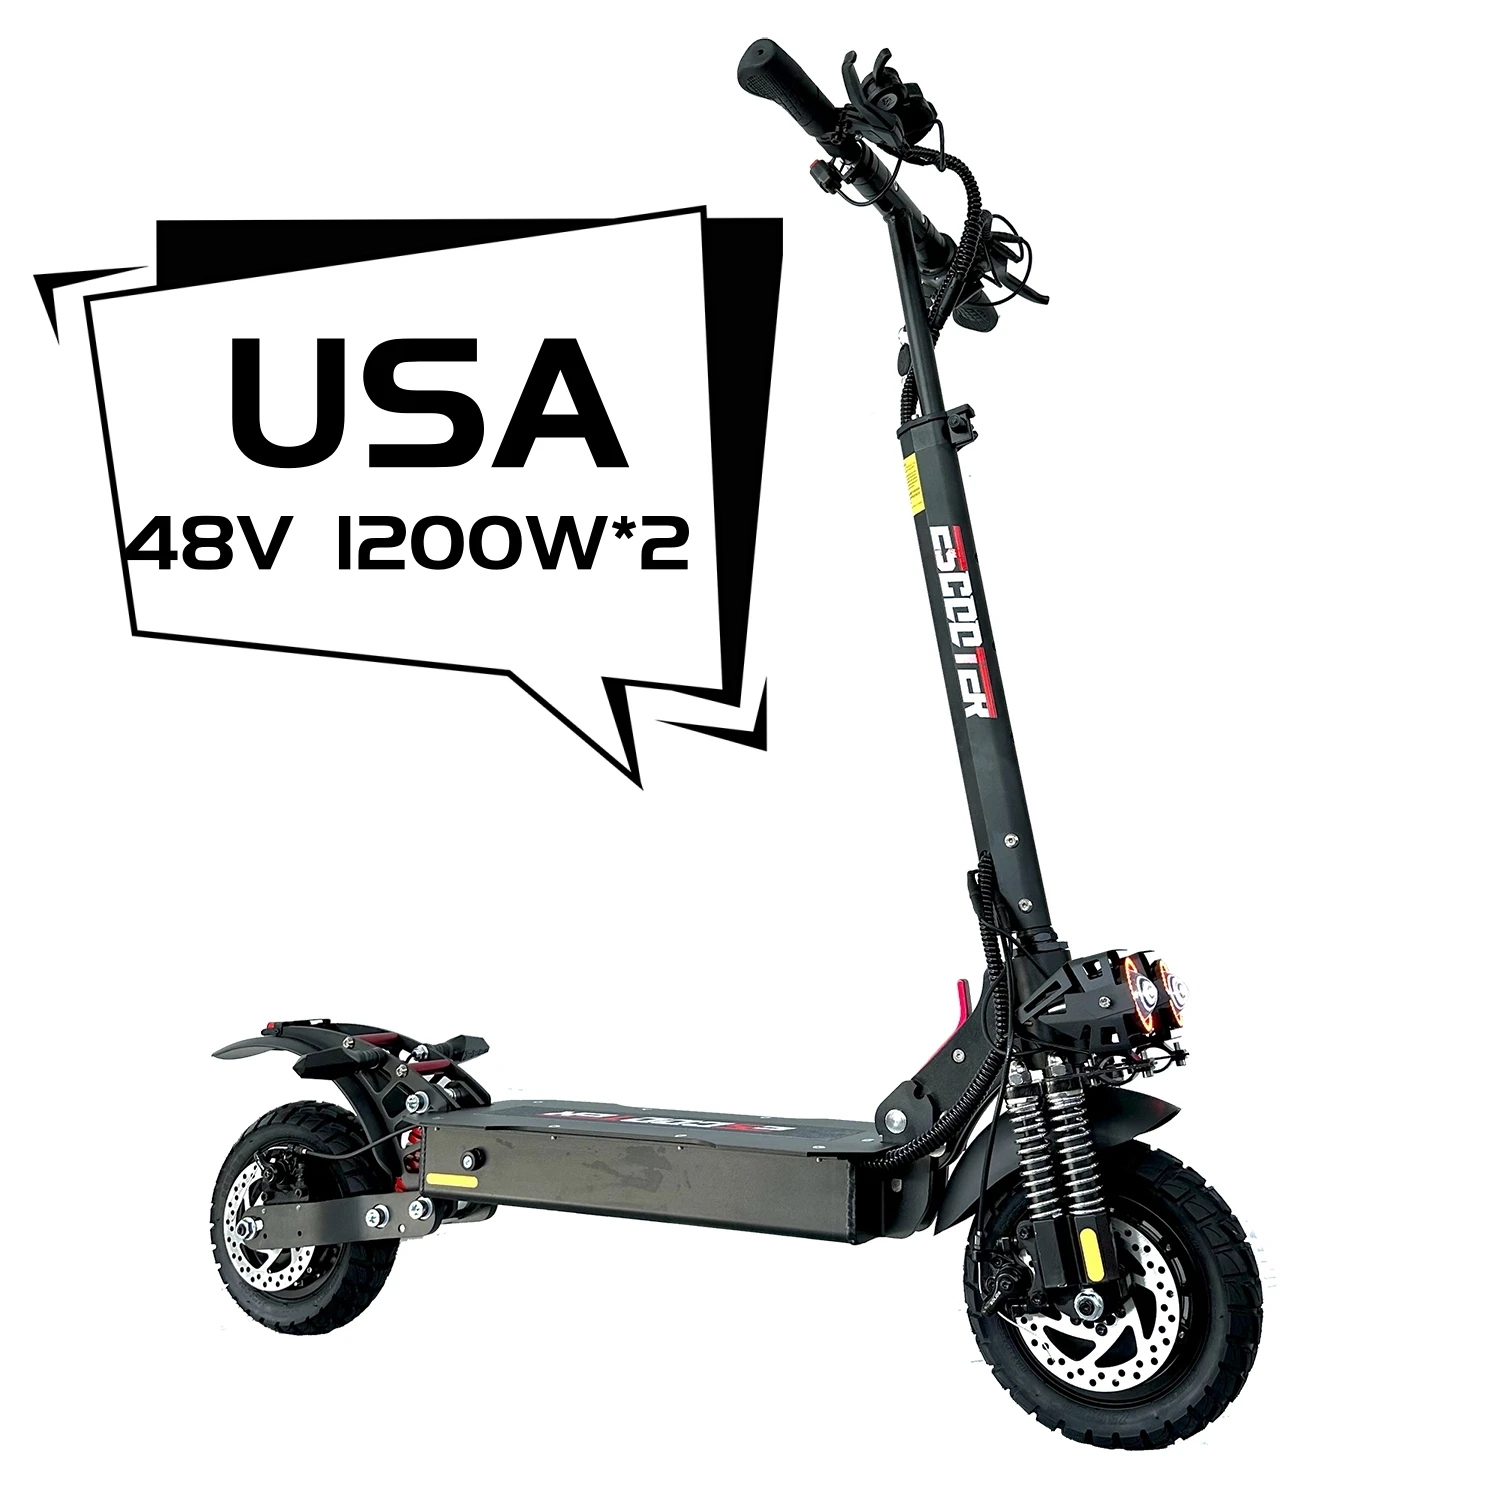 

10 Inch Tire Electric Scooters in USA 2400w 48V Powerful Escooter max climbing 50 degrees For Adults max speed 55KM/H